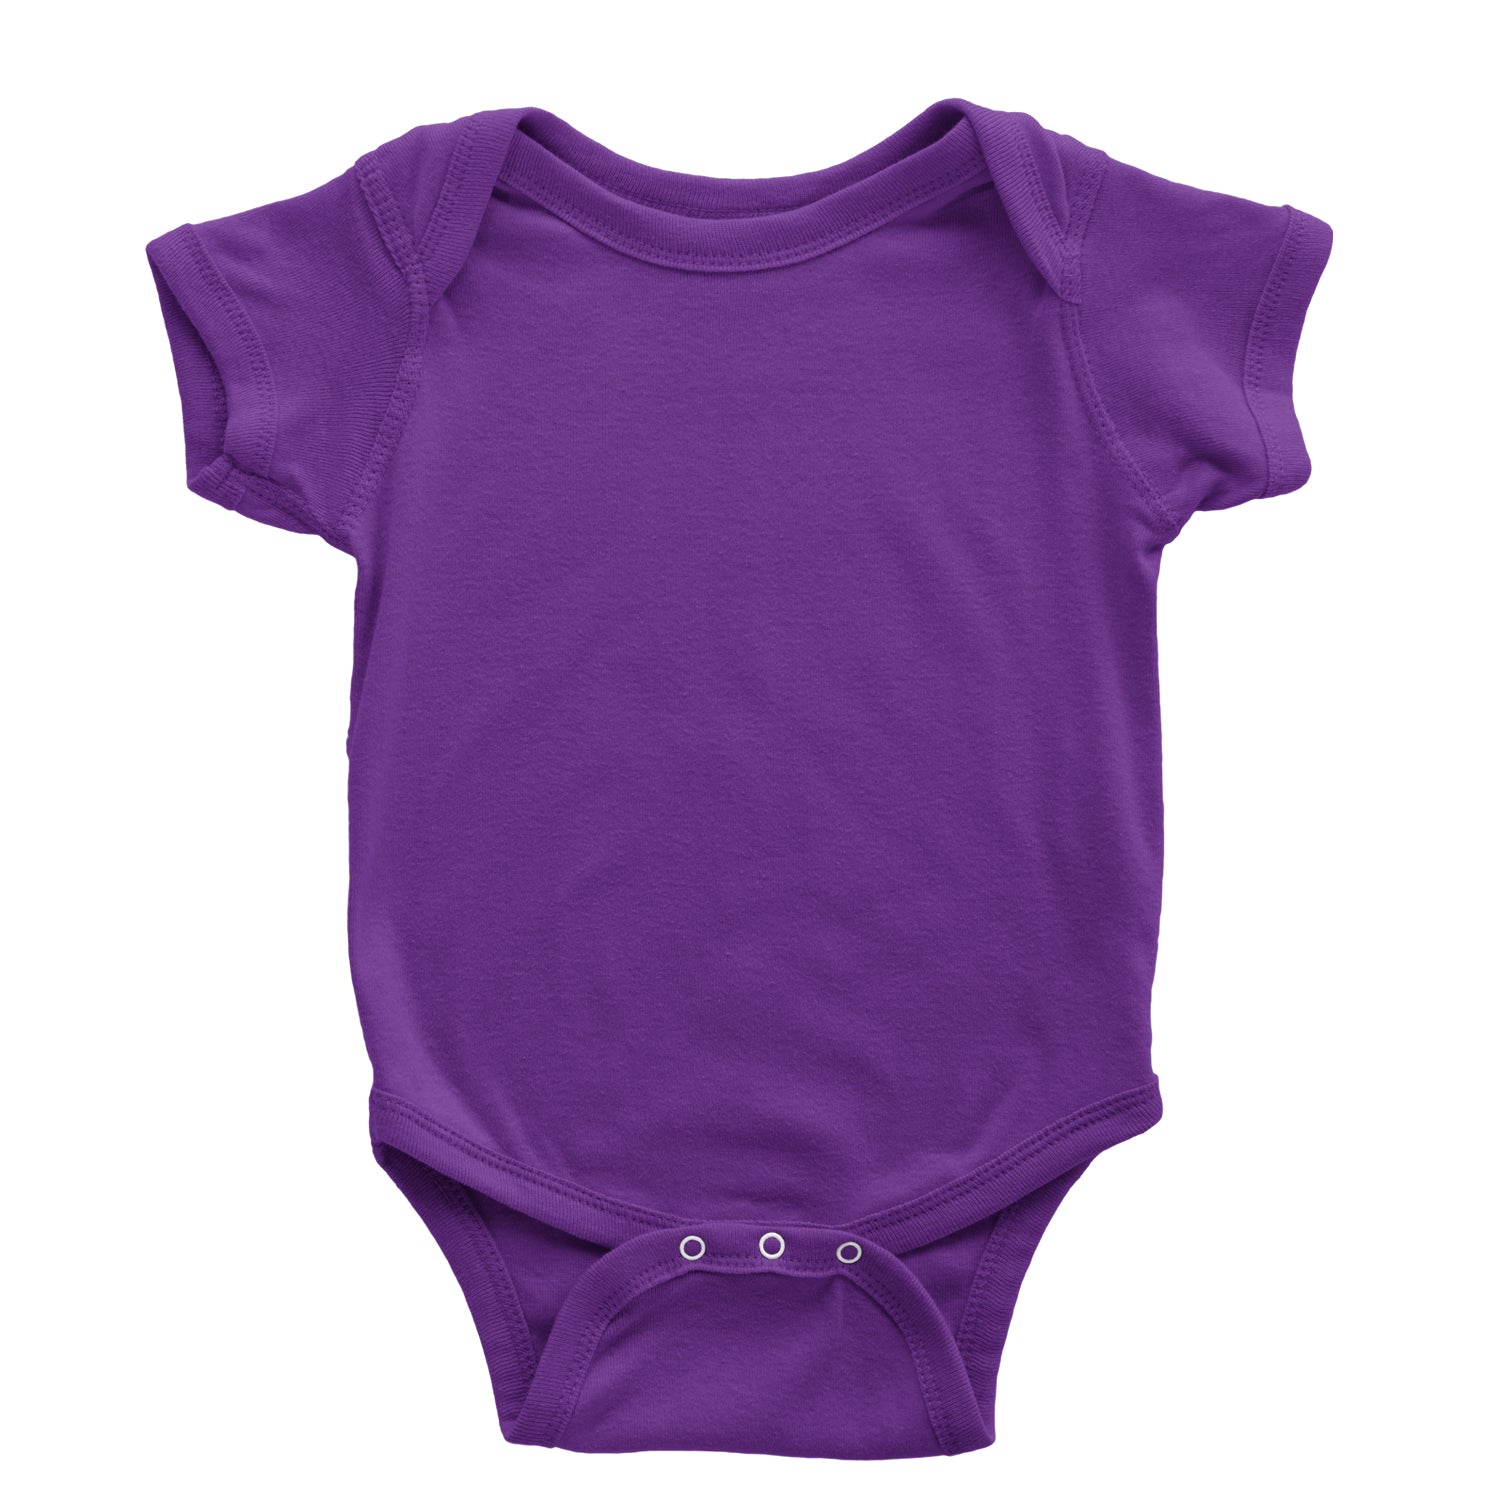 Custom Infant One-Piece Romper Bodysuit custom, CustomClothing, customized, personalized by Expression Tees